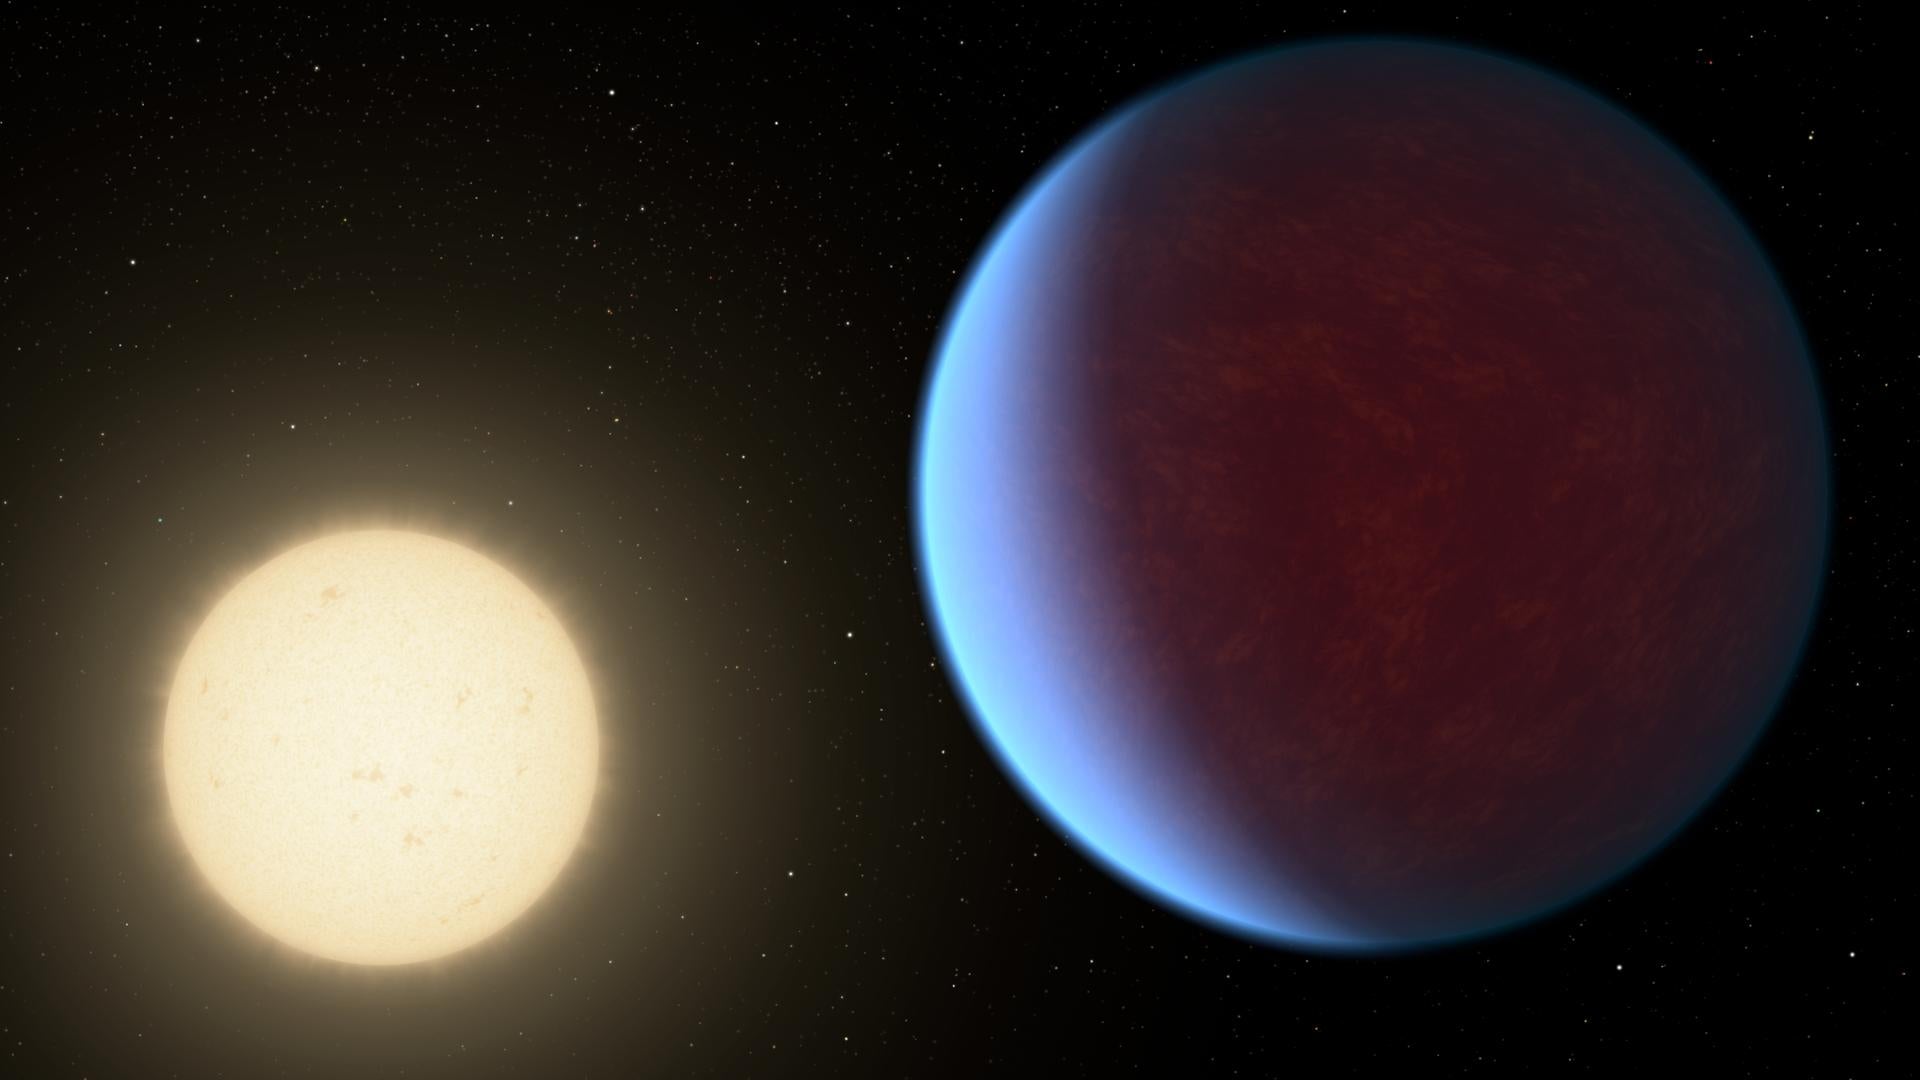 An artist’s conception of the exoplanet 55 Cancri e near its star